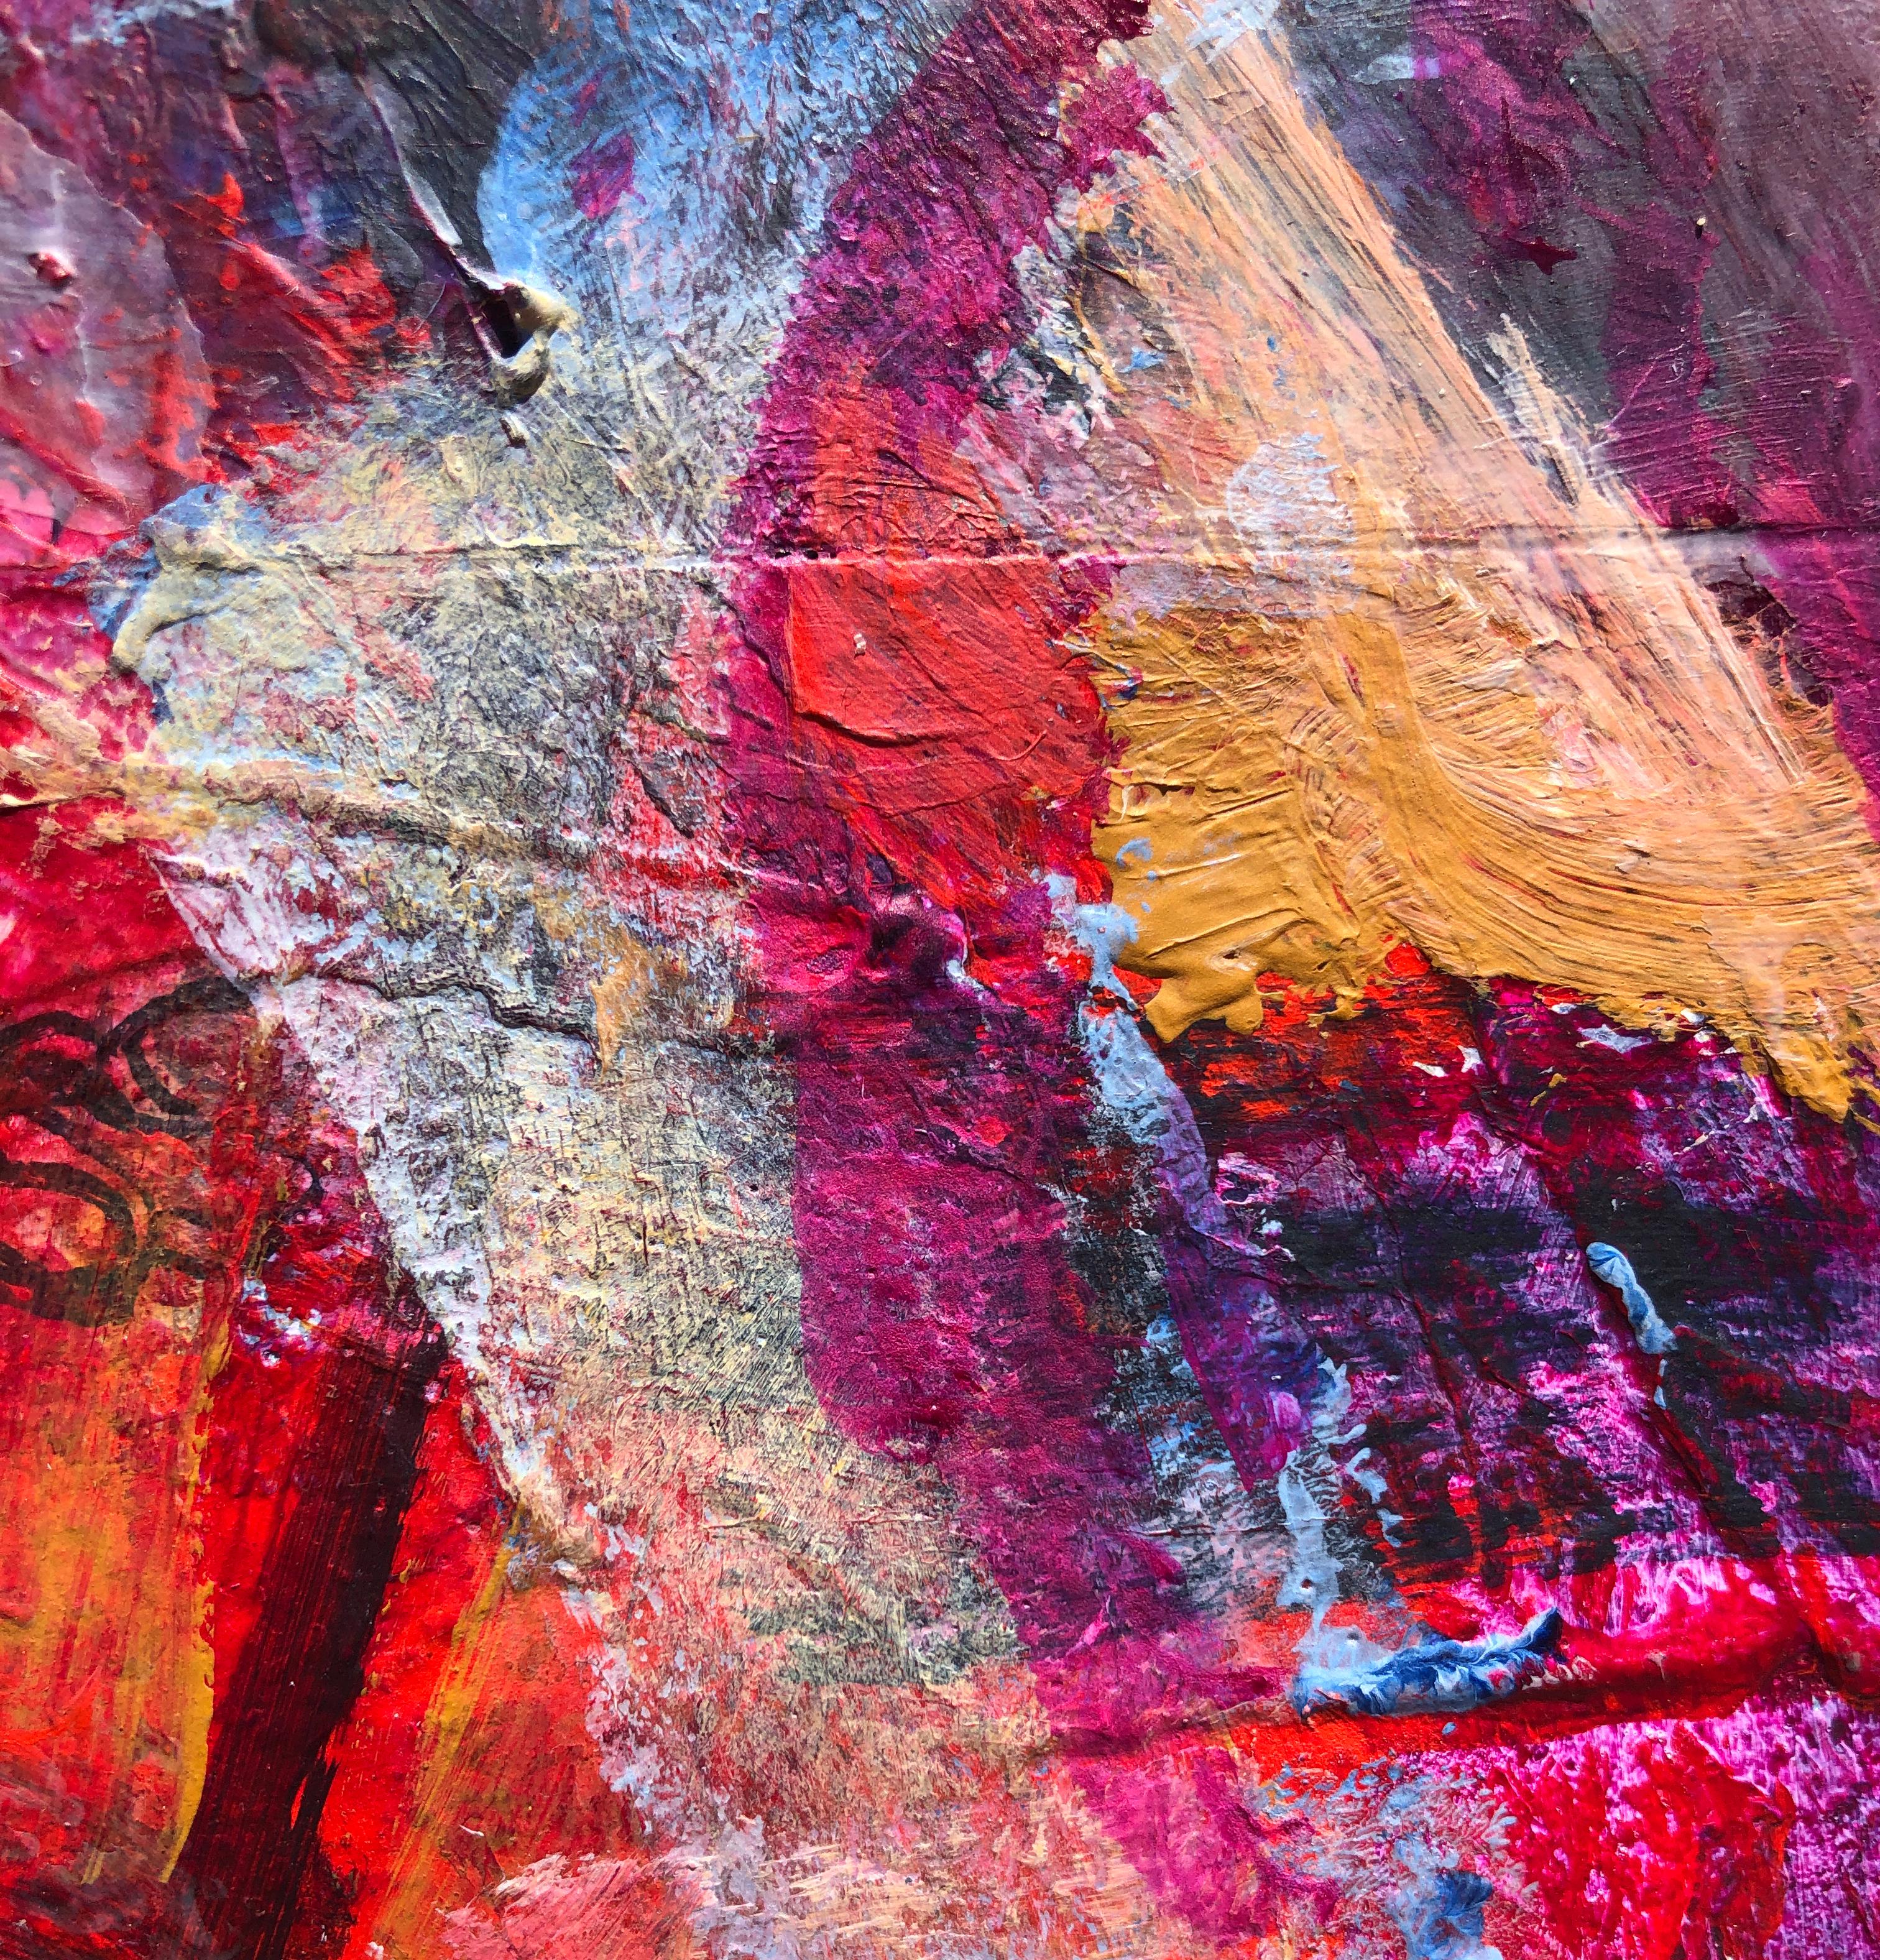 <p>Artist Comments<br />An abstract nude in shades of scarlet and purple. Sharon describes her brushwork in this piece as a patchwork of strokes, giving the figure motion, as if lost in dance.</p><br /><p>About the Artist<br />Sharon Sieben prefers